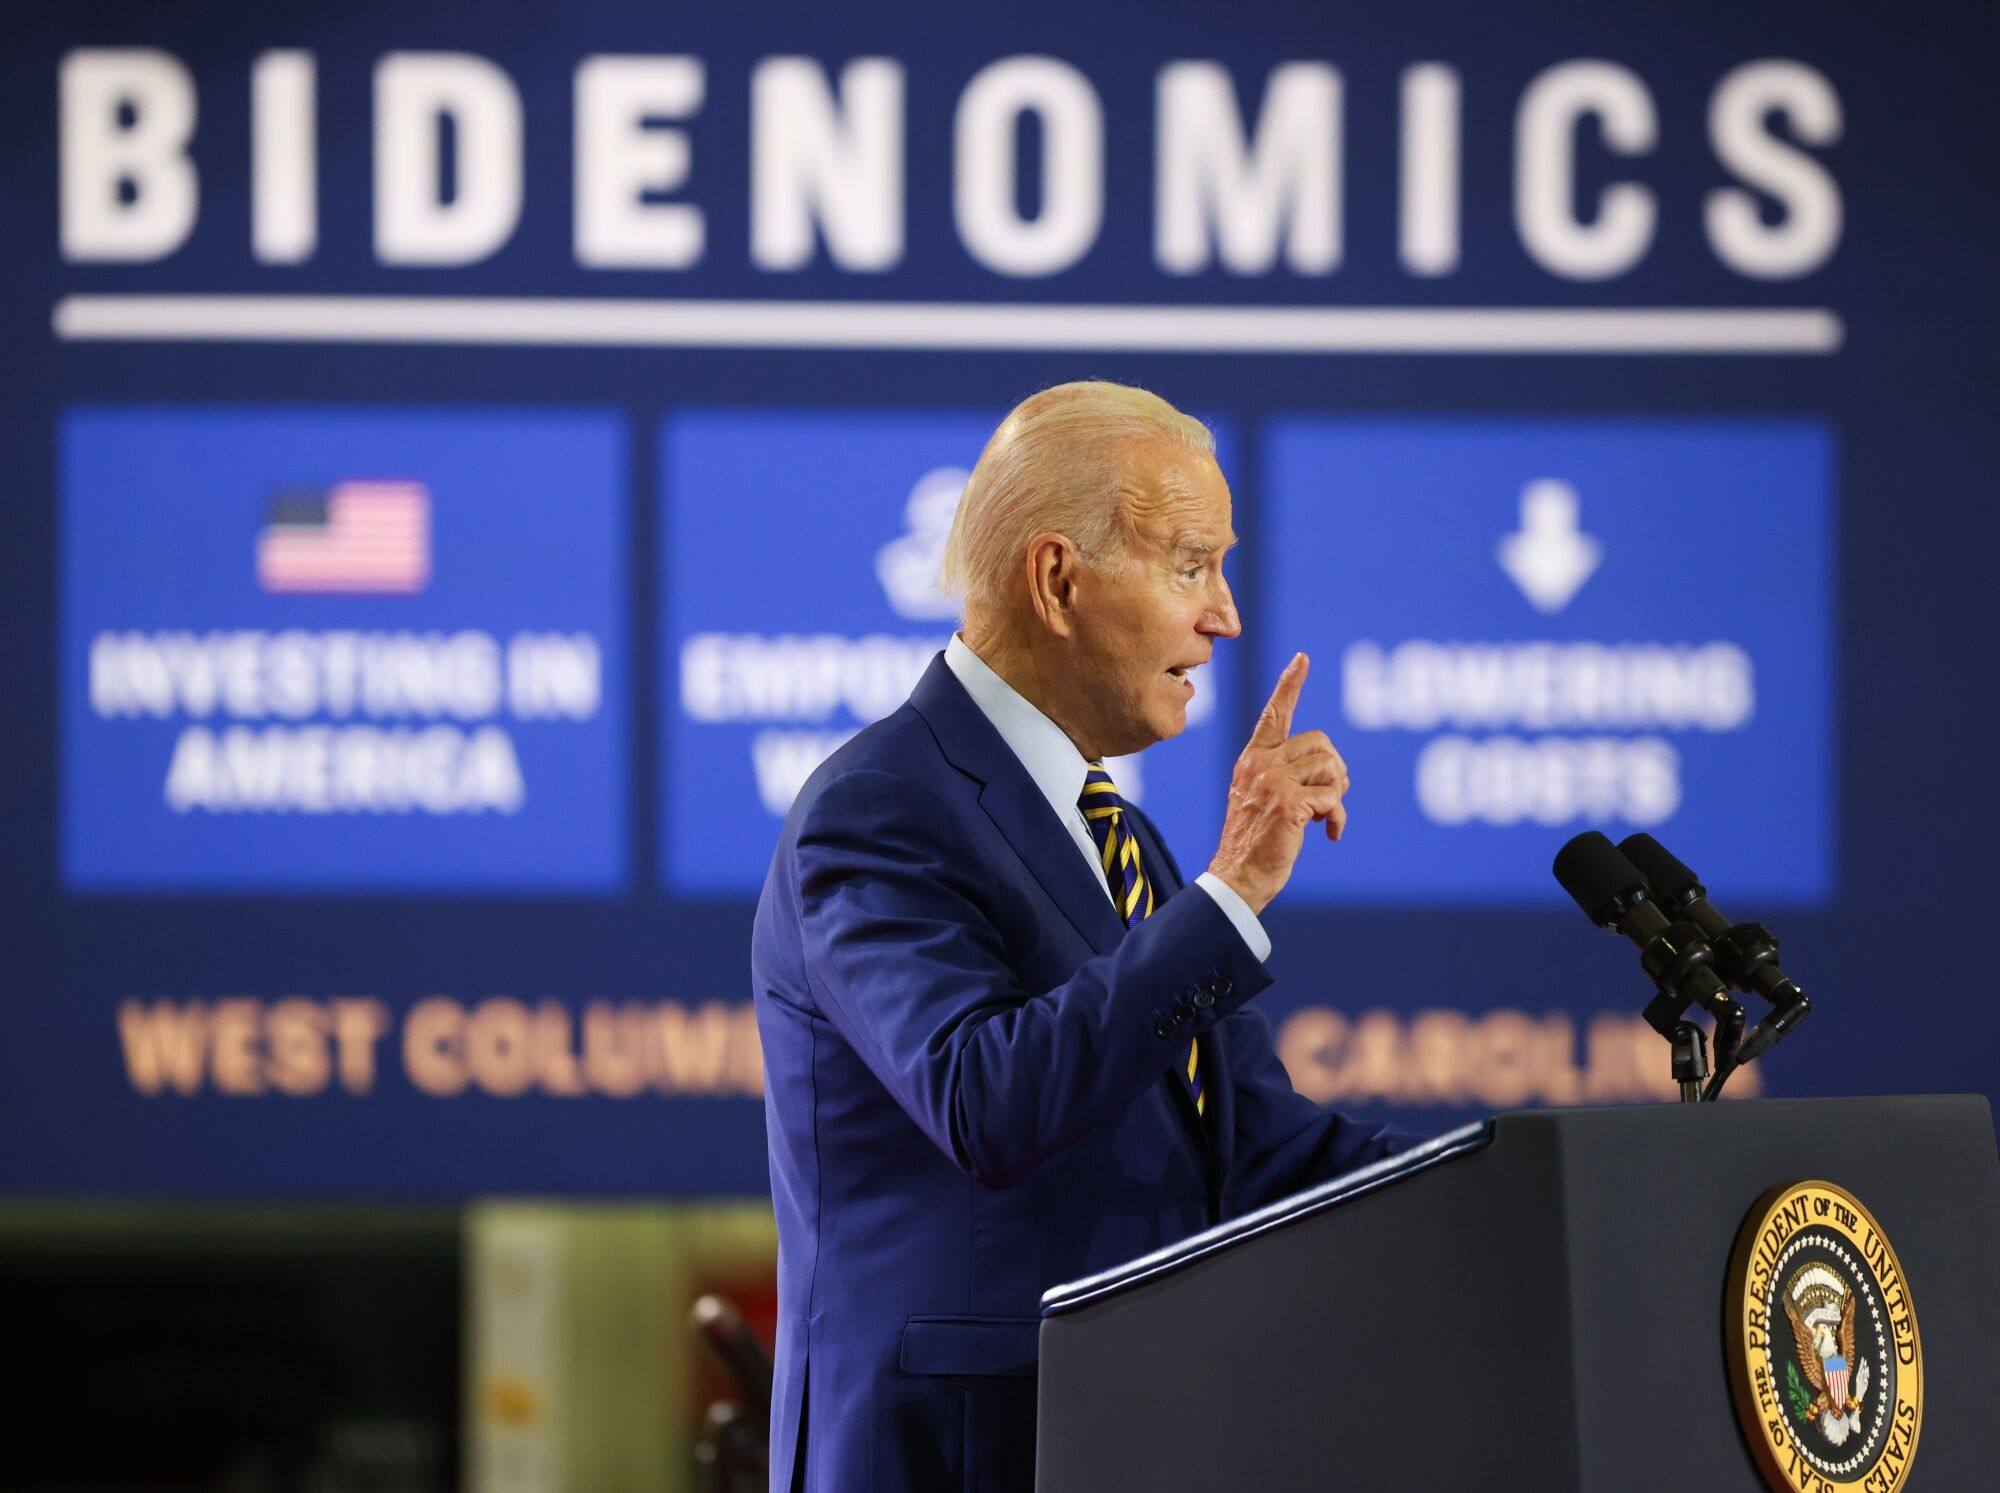 US President Joe Biden speaks at an event at the Flex facility in West Columbia, South Carolina, on July 6. The Biden administration has enacted a series of measures designed to bring manufacturing and other jobs back to the United States and friendly countries, which some have decried as protectionism. Photo: Bloomberg